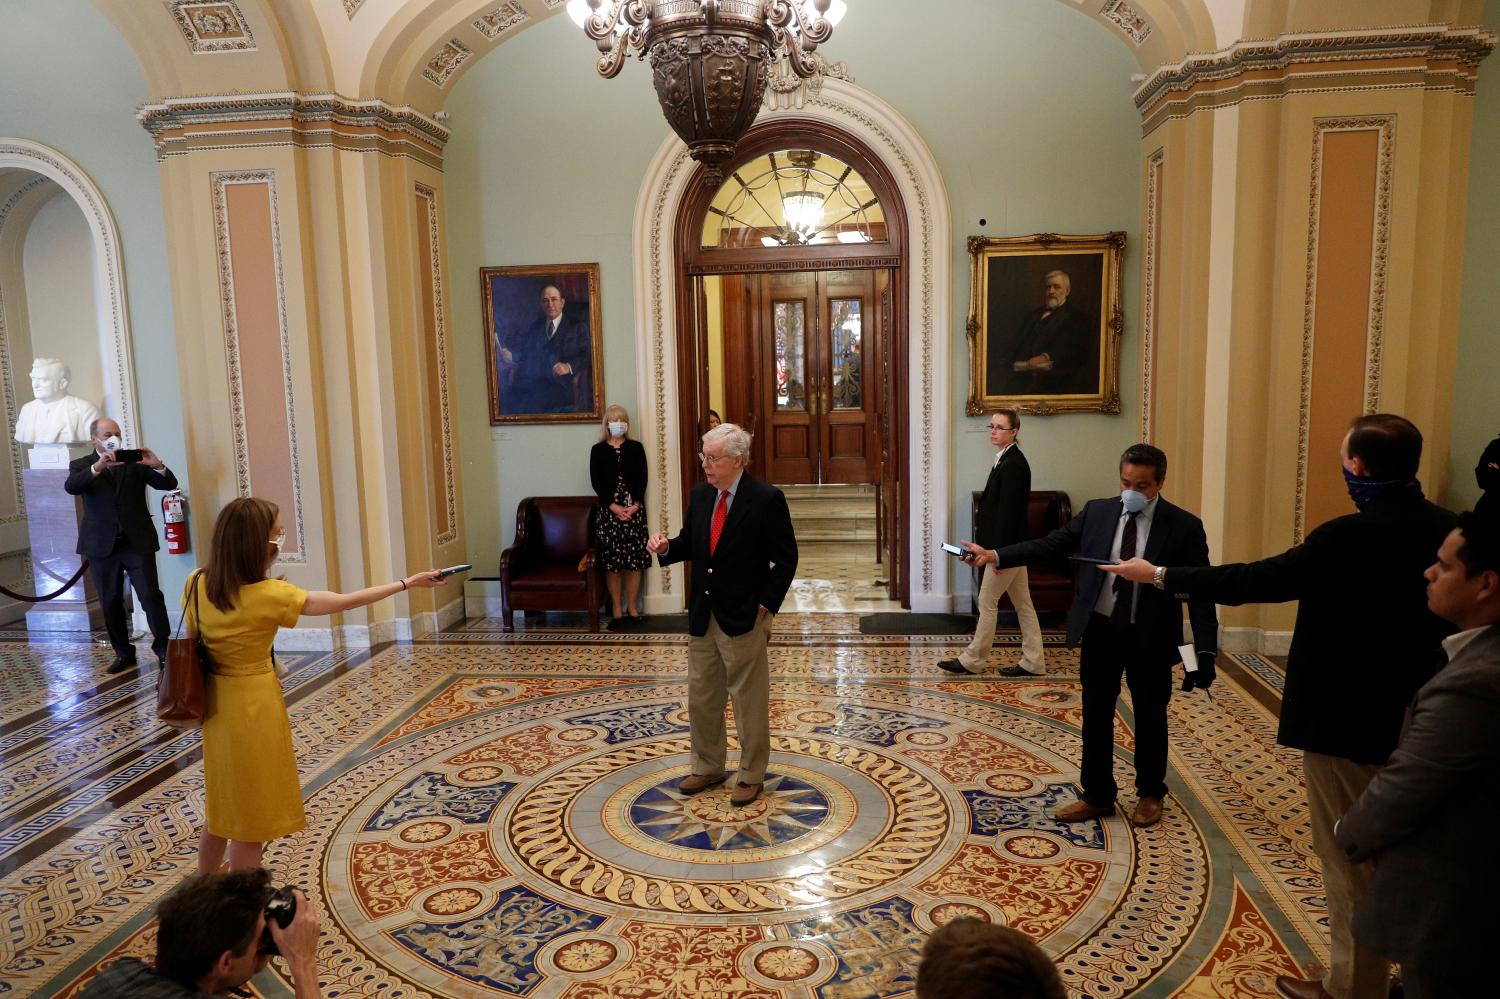 U.S. Senate Majority Leader Mitch McConnell (R-KY) speaks to members of the news media after departing from the Senate Chamber floor on Capitol Hill in Washington, U.S. , April 9, 2020. REUTERS/Tom Brenner